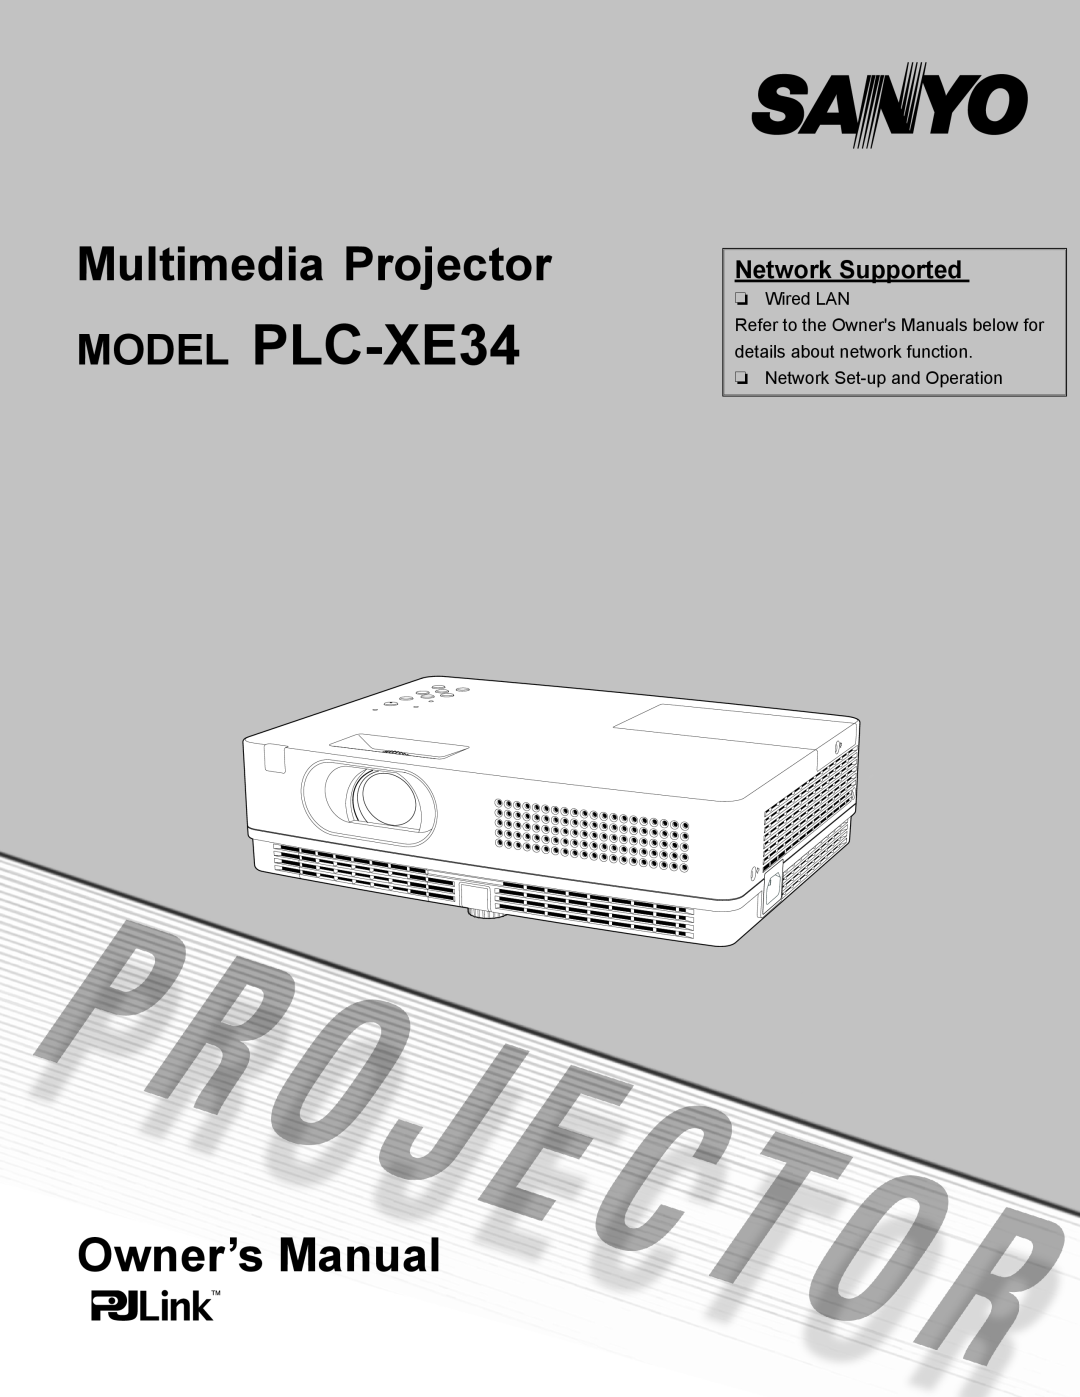 Sanyo owner manual Network Supported, MODEL PLC-XE34, Multimedia Projector, Owner’s Manual 